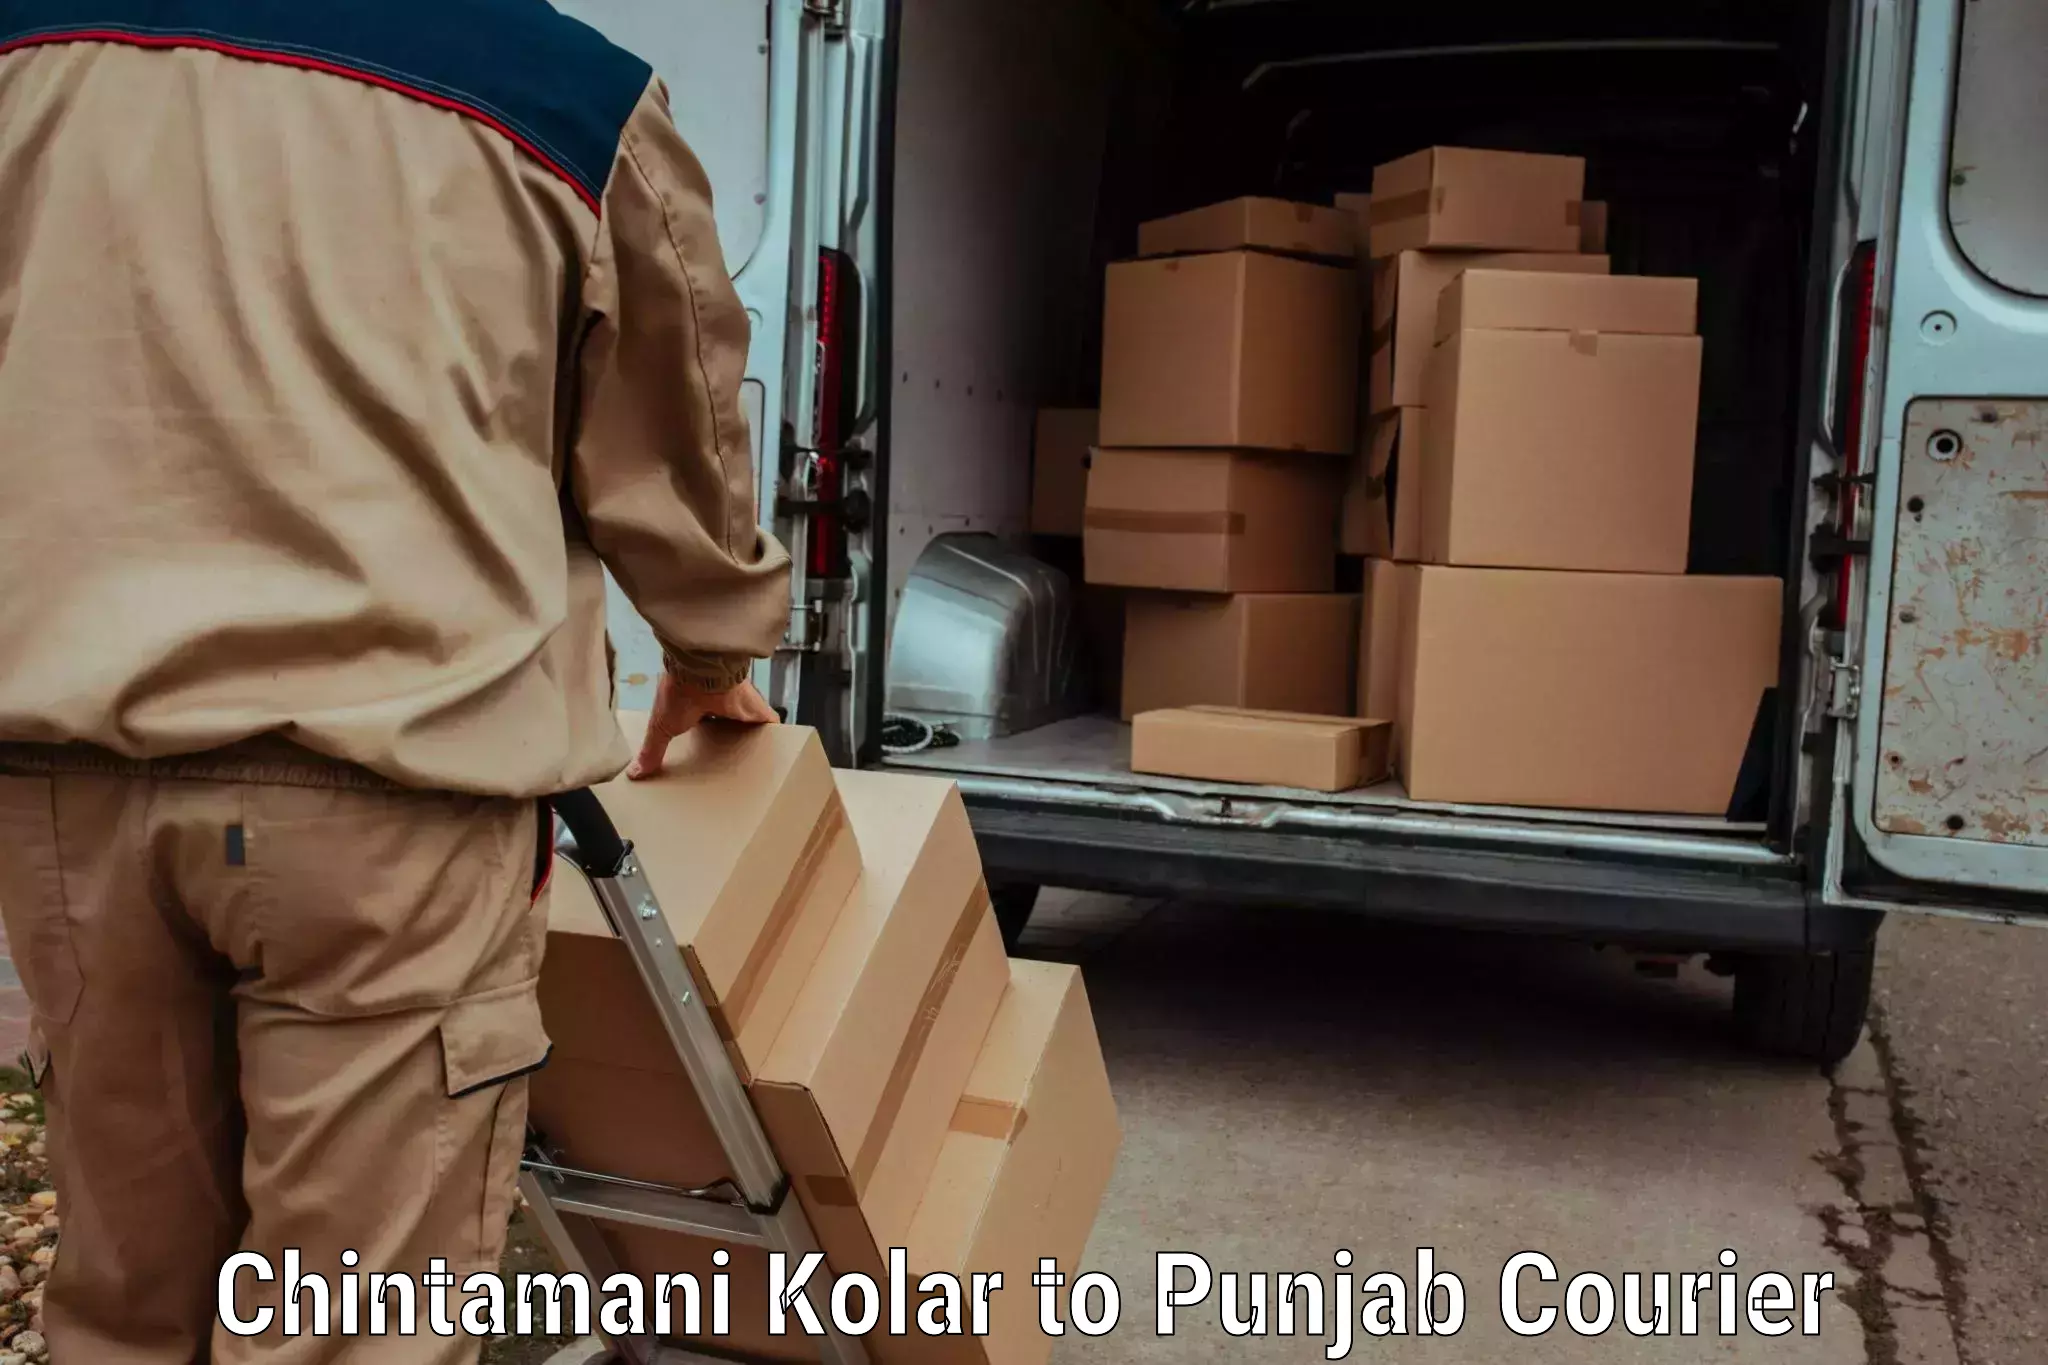 Easy access courier services in Chintamani Kolar to Ropar